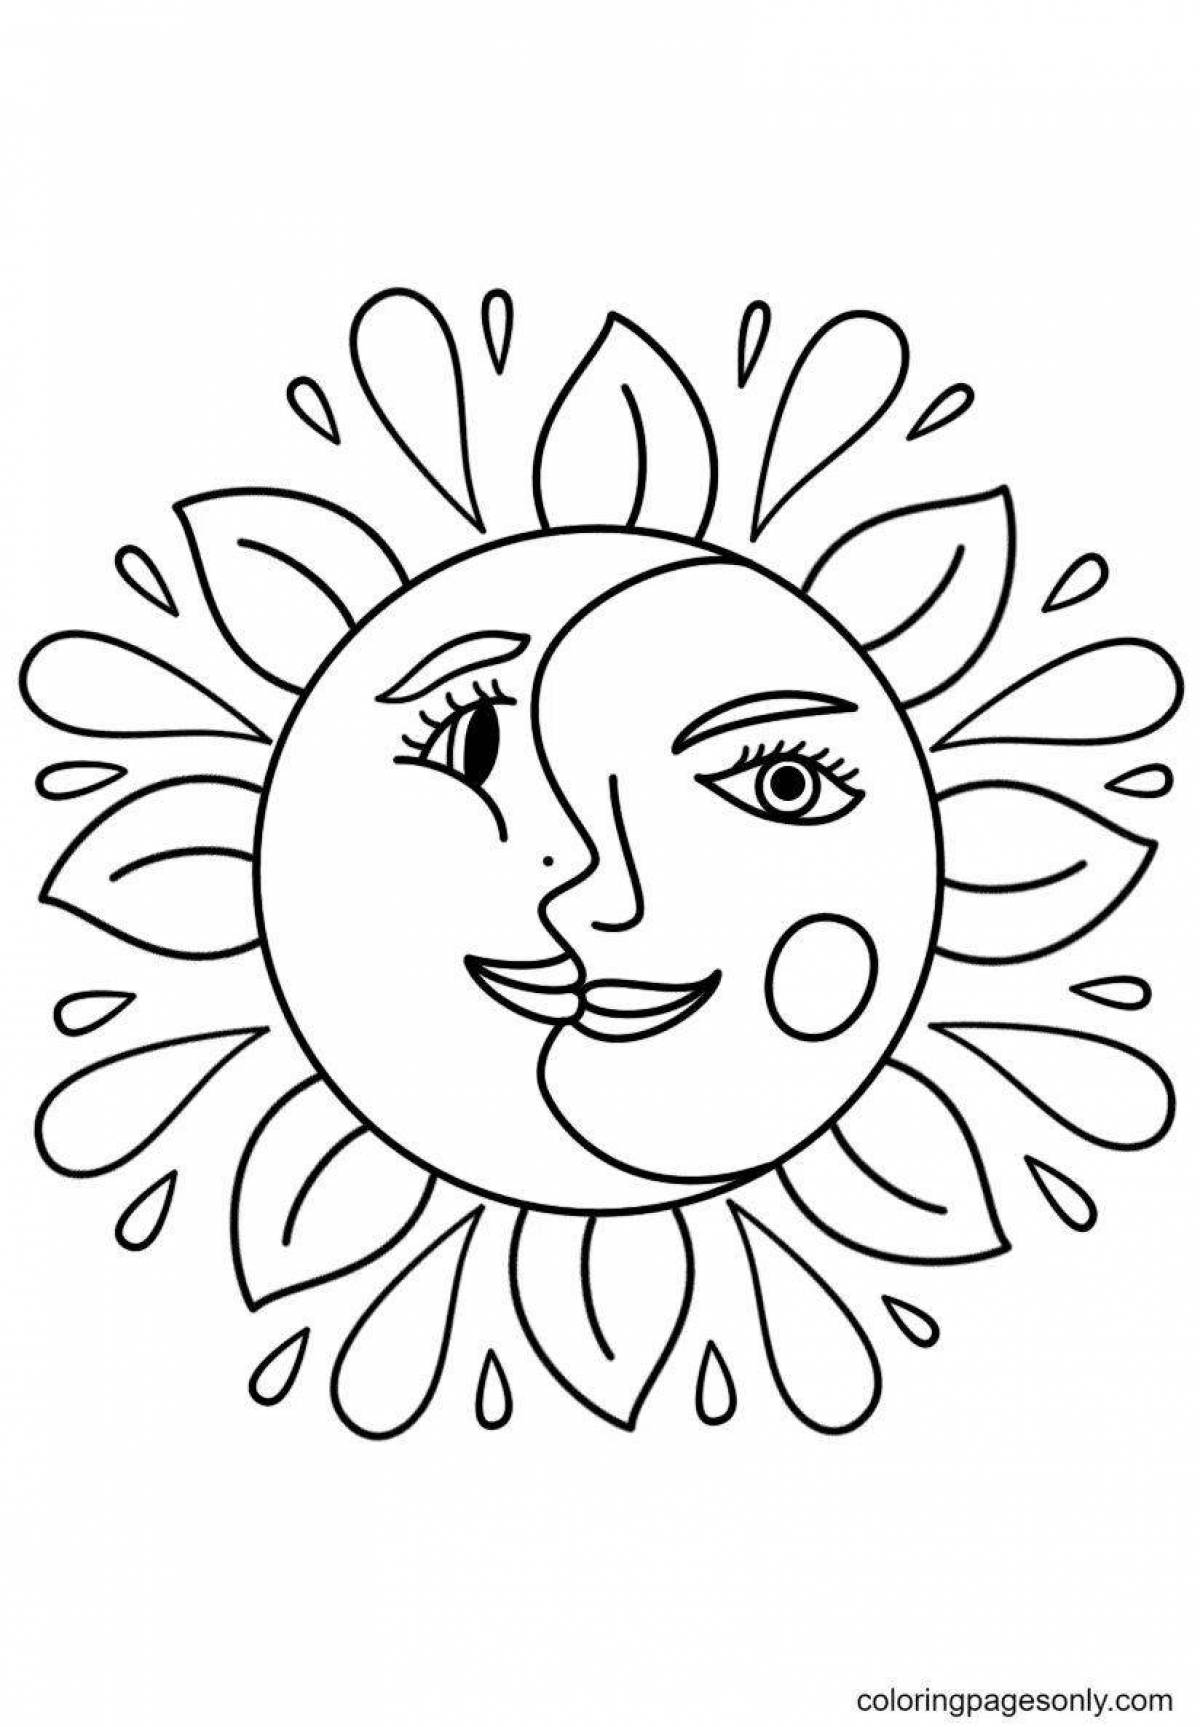 Glitter coloring moon and sun for kids